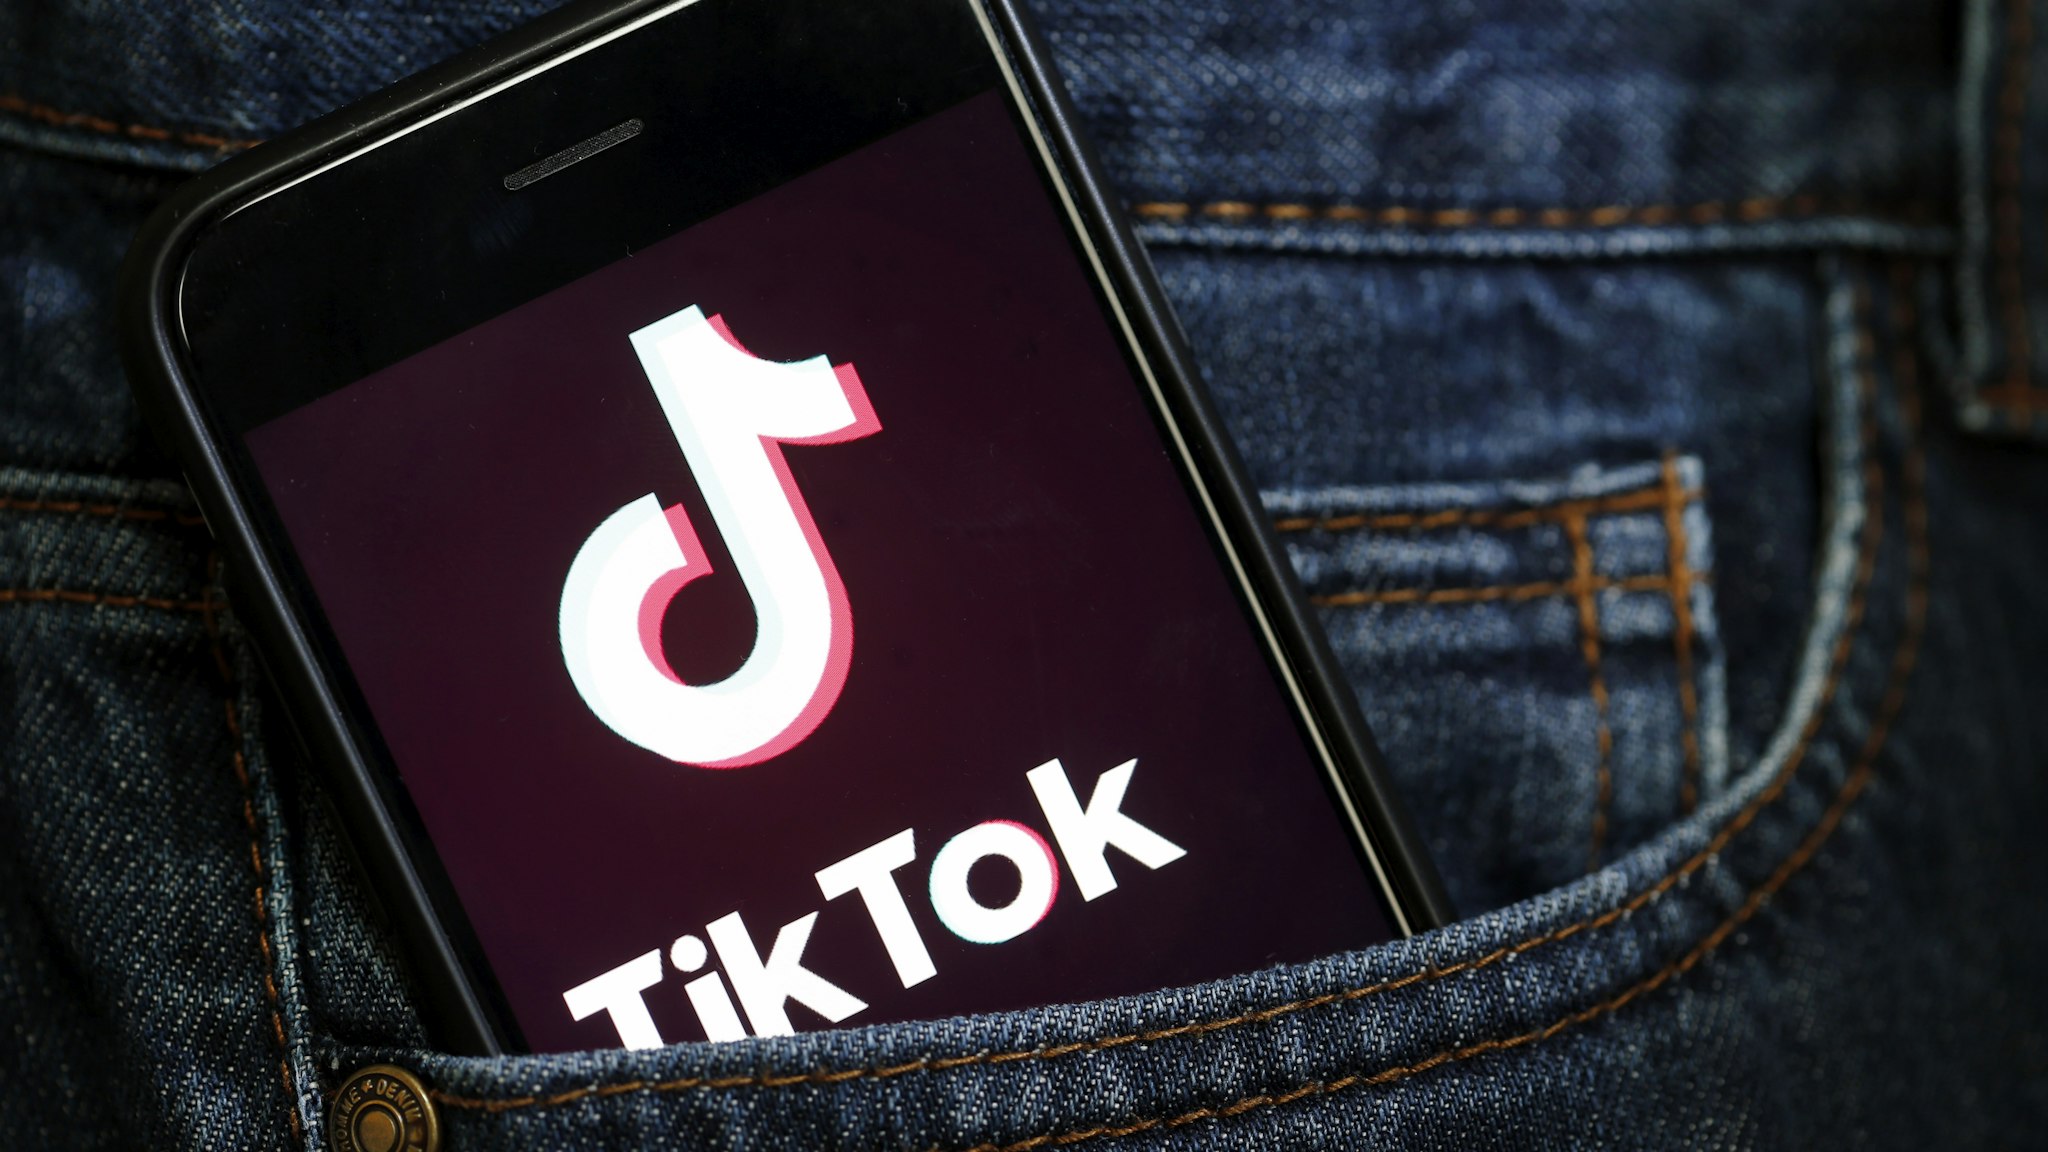 PARIS, FRANCE - MARCH 05: In this photo illustration, the social media application logo, Tik Tok is displayed on the screen of an iPhone on March 05, 2019 in Paris, France. The social network broke the rules for the protection of children's online privacy (COPPA) and was fined $ 5.7 million. The fact TikTok criticized is quite serious in the United States, the platform, which currently has more than 500 million users worldwide, collected data that should not have asked minors. TikTok, also known as Douyin in China, is a media app for creating and sharing short videos. Owned by ByteDance, Tik Tok is a leading video platform in Asia, United States, and other parts of the world. In 2018, the application gained popularity and became the most downloaded app in the U.S. in October 2018.